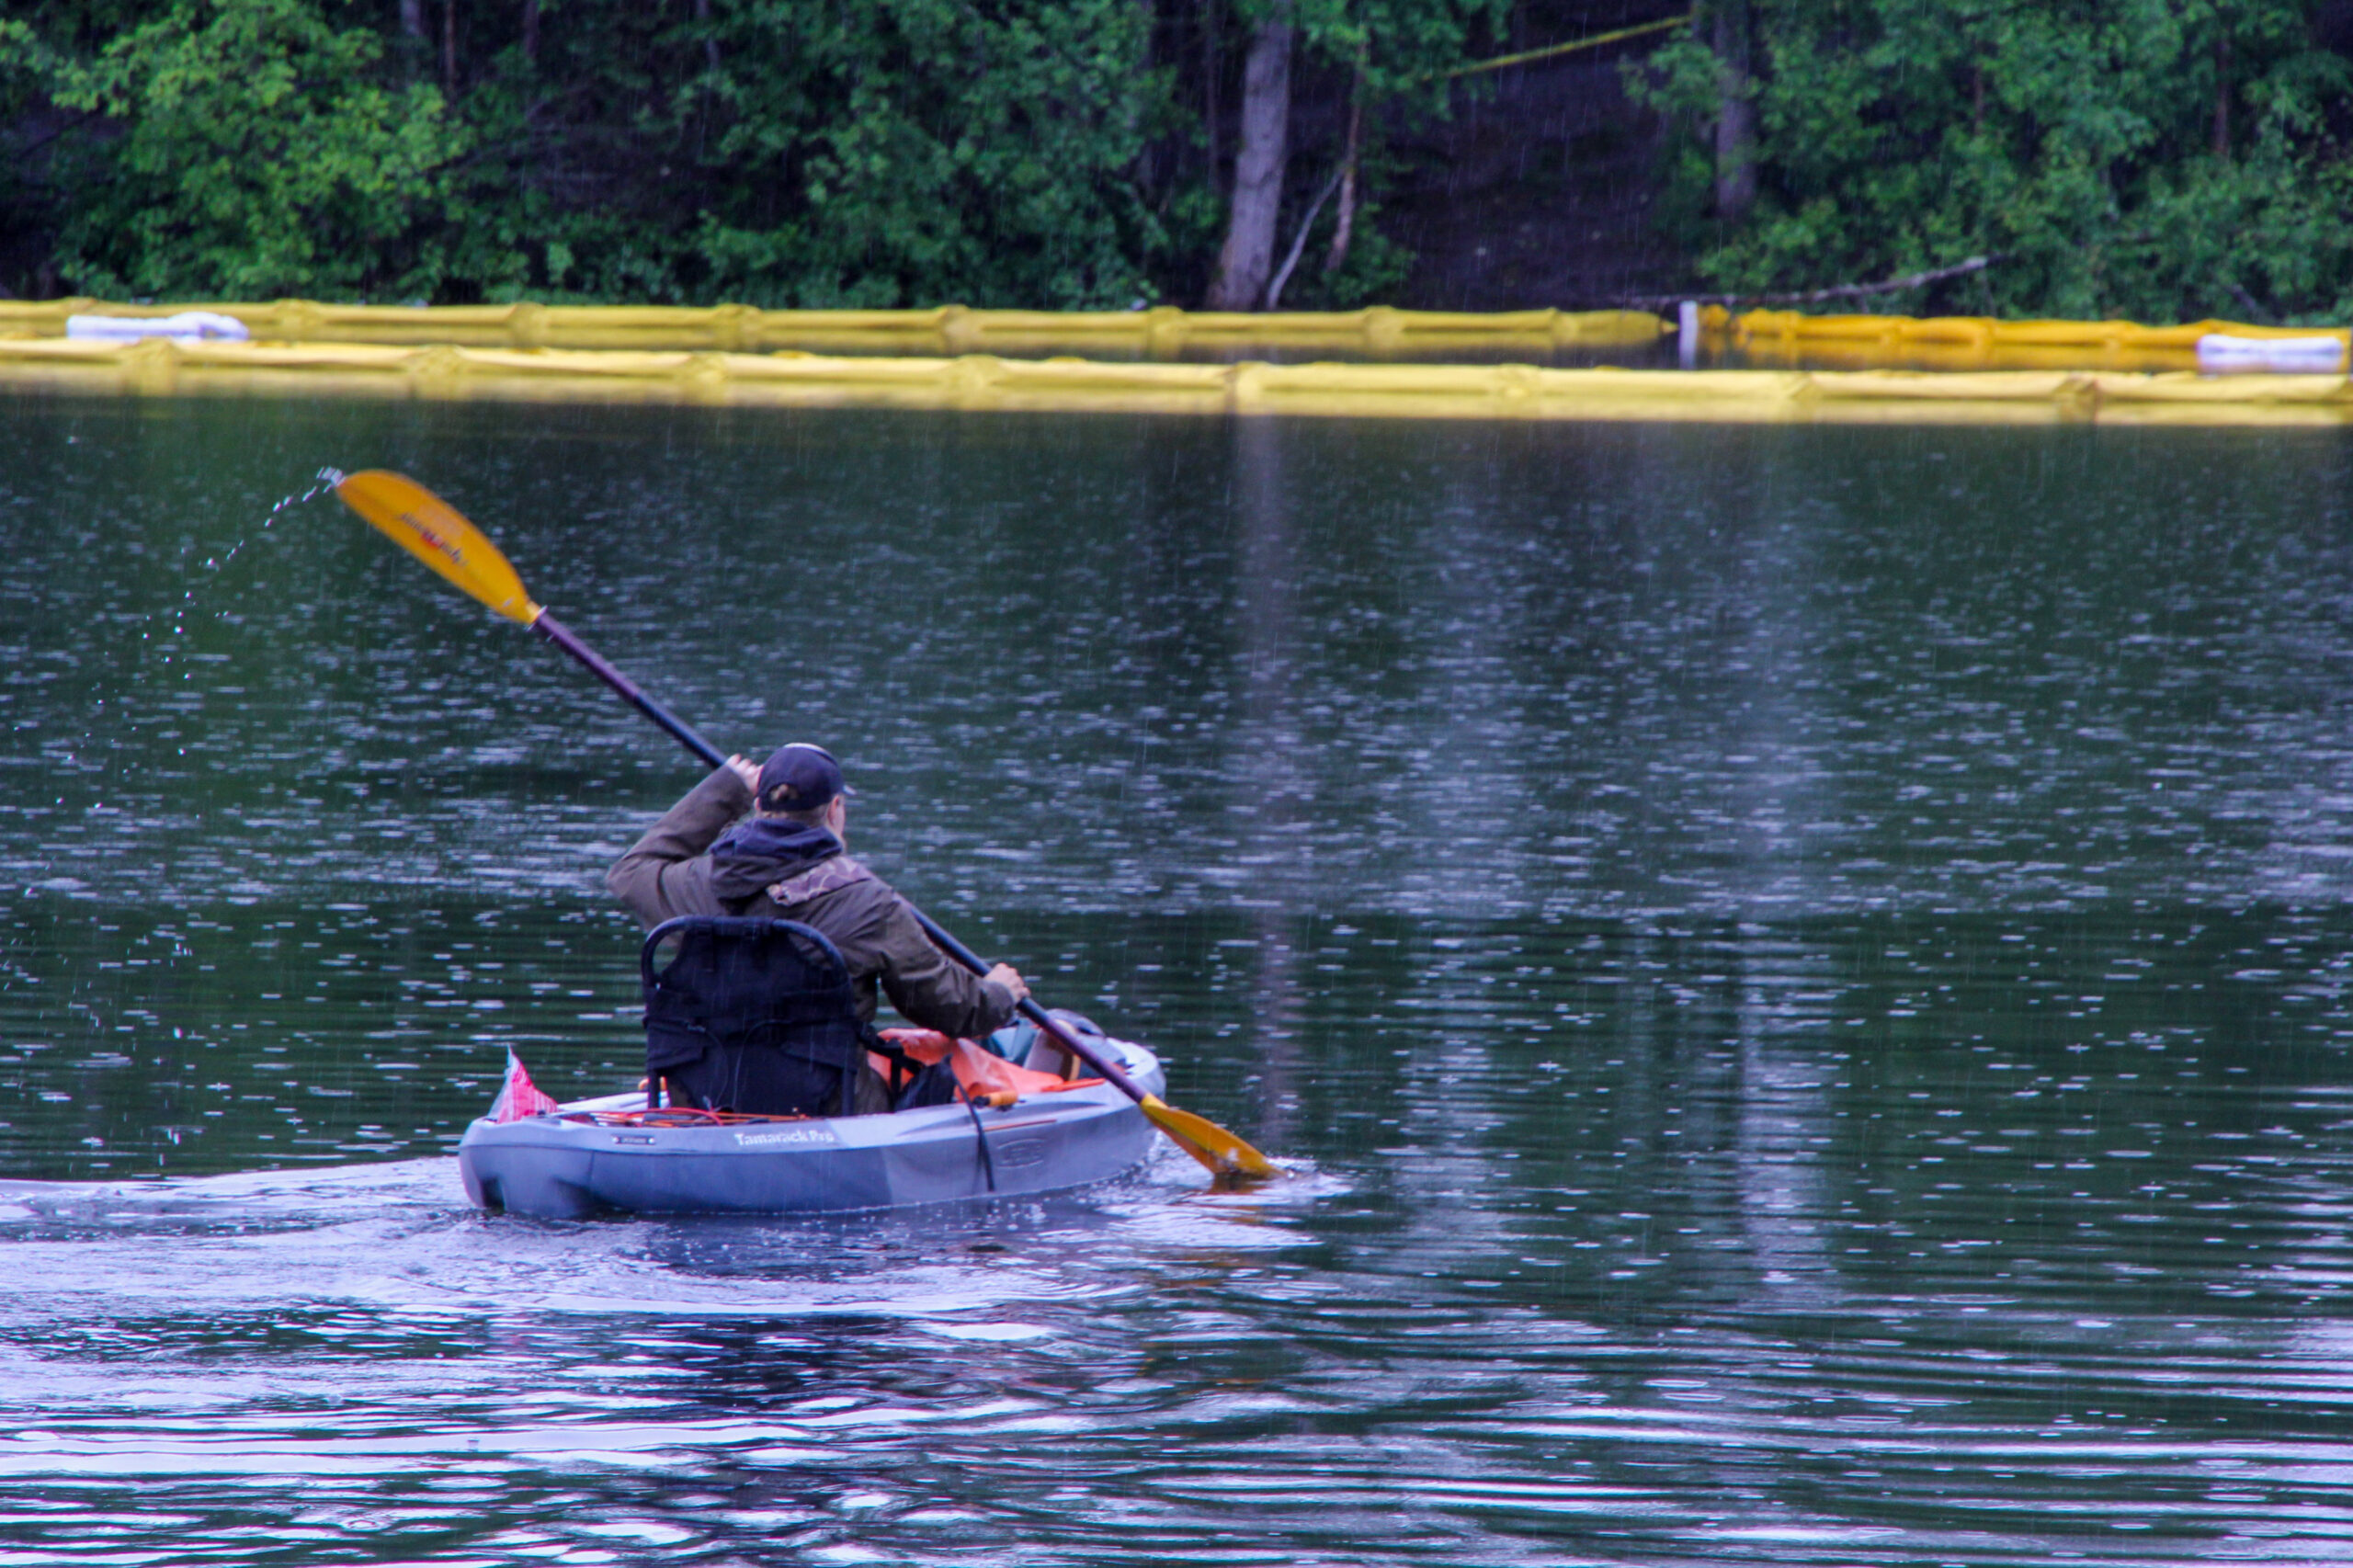 A man in a kayak near lines of yellow floats